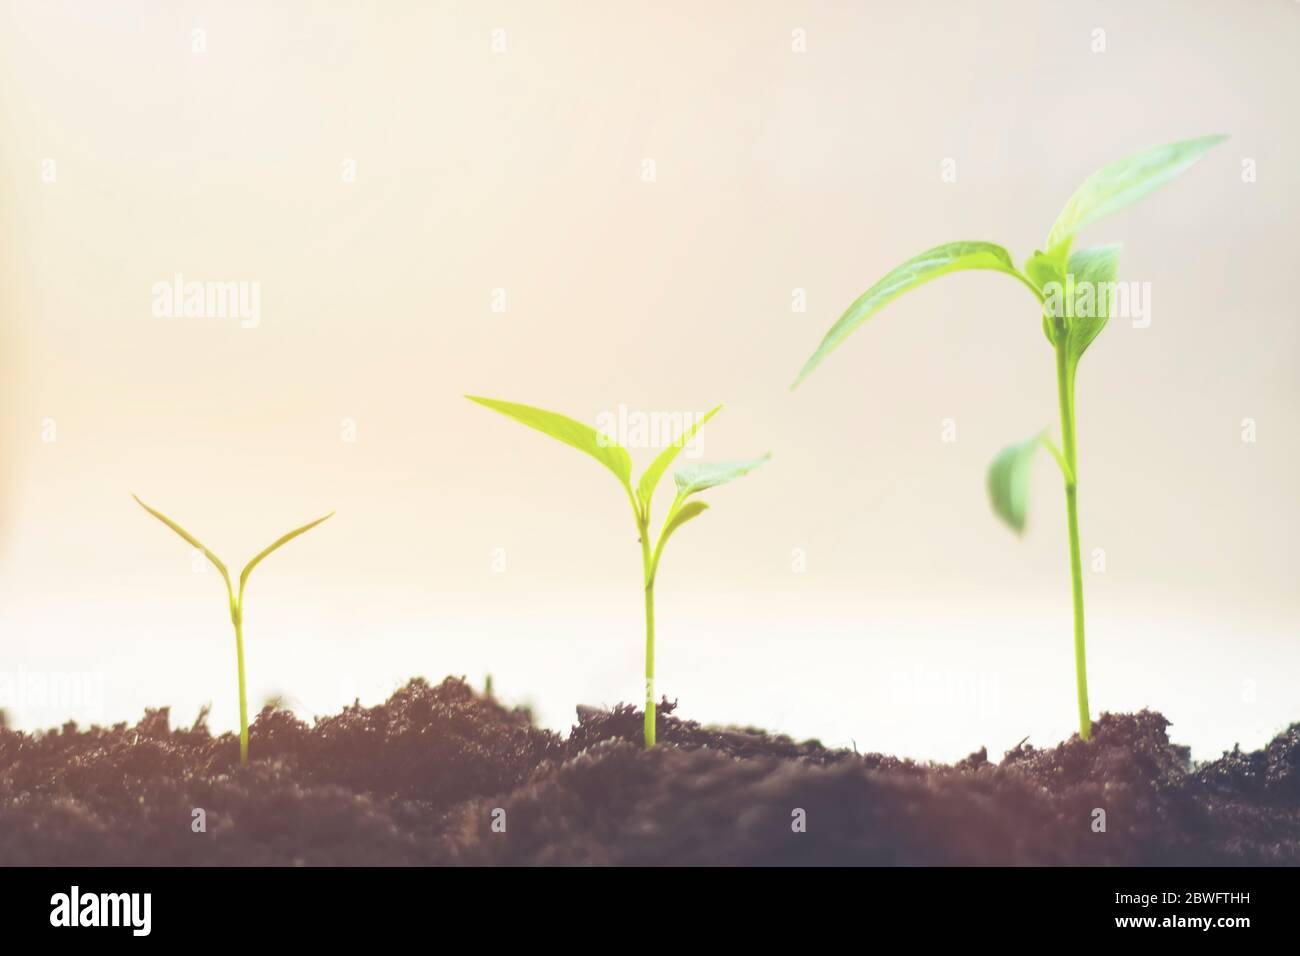 Growth Sequence - A sequence of seedlings growing progressively taller, isolated against a white background. Small trees of different sizes on white b Stock Photo